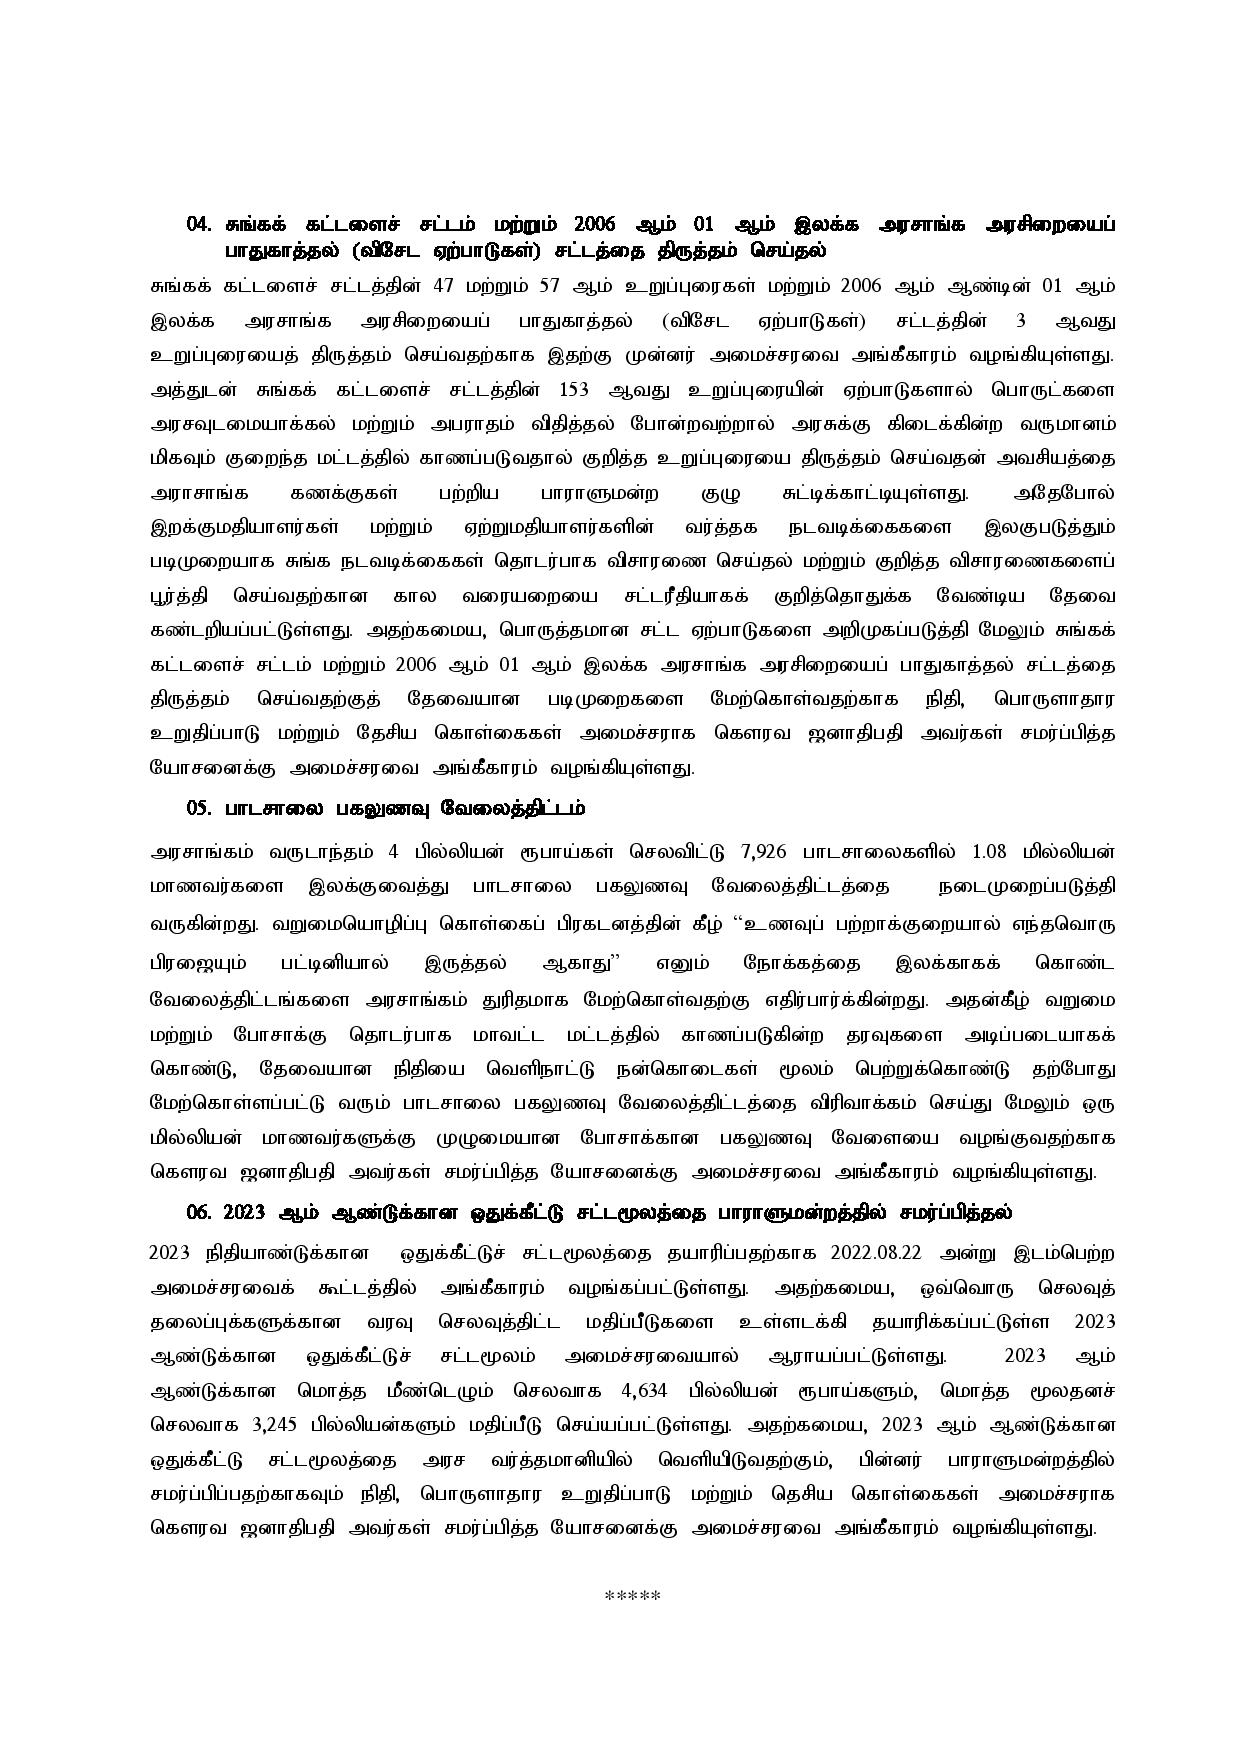 Cabinet Decisions on 03.10.2022 Tamil page 002